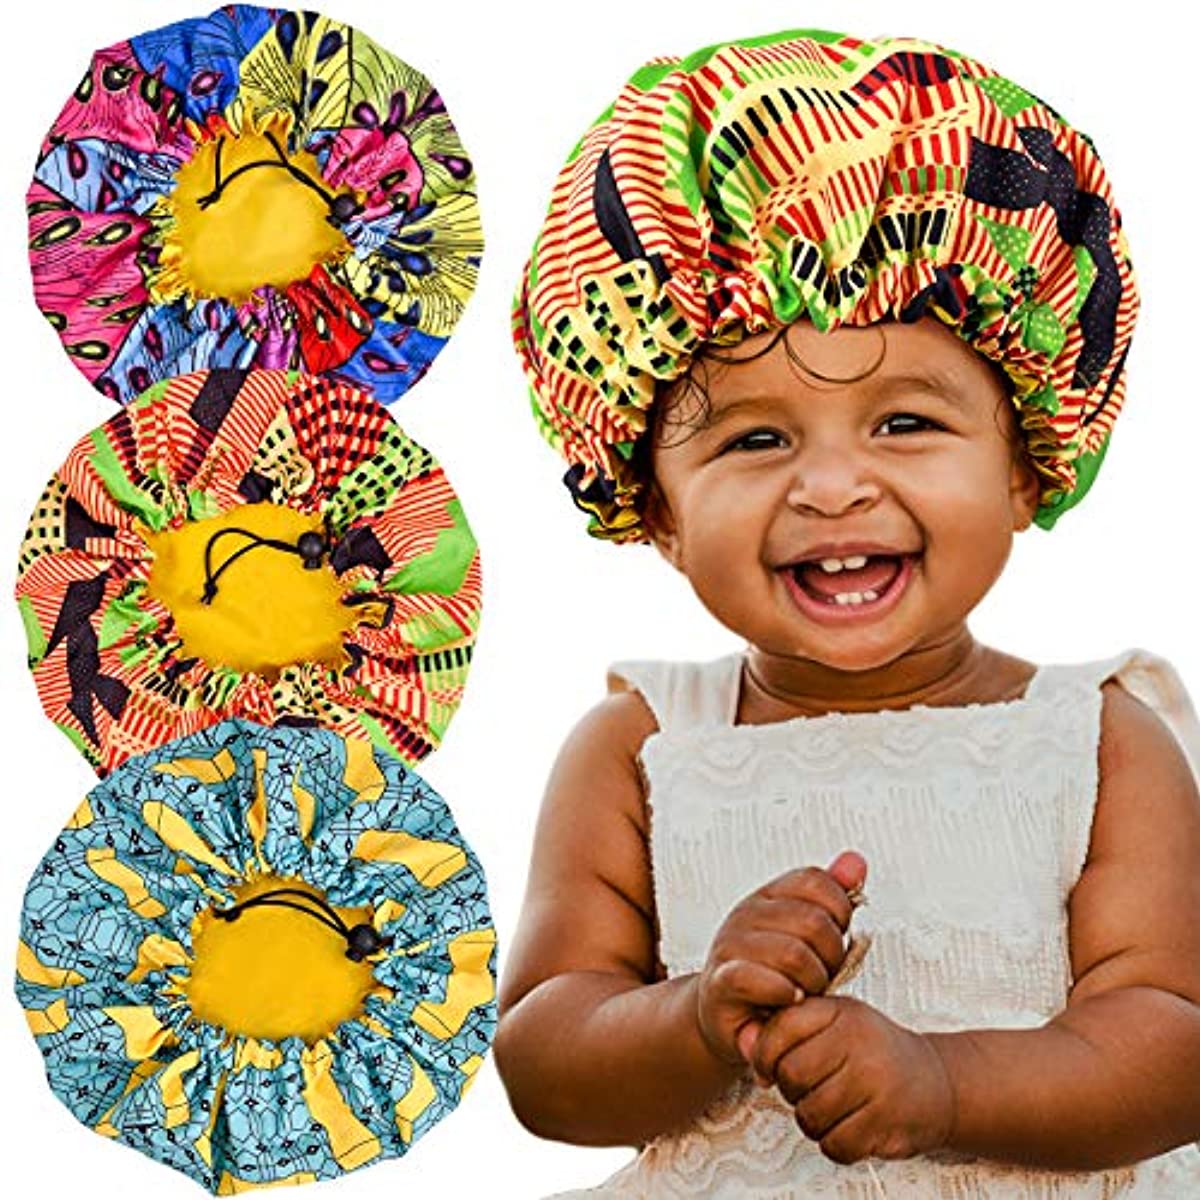 3 Pieces Kids Satin Bonnet Adjustable Sleeping Cap Soft Silk Flower Night Hats for Natural Hair Teens Toddler Child Baby Reversible Double Showering Caps